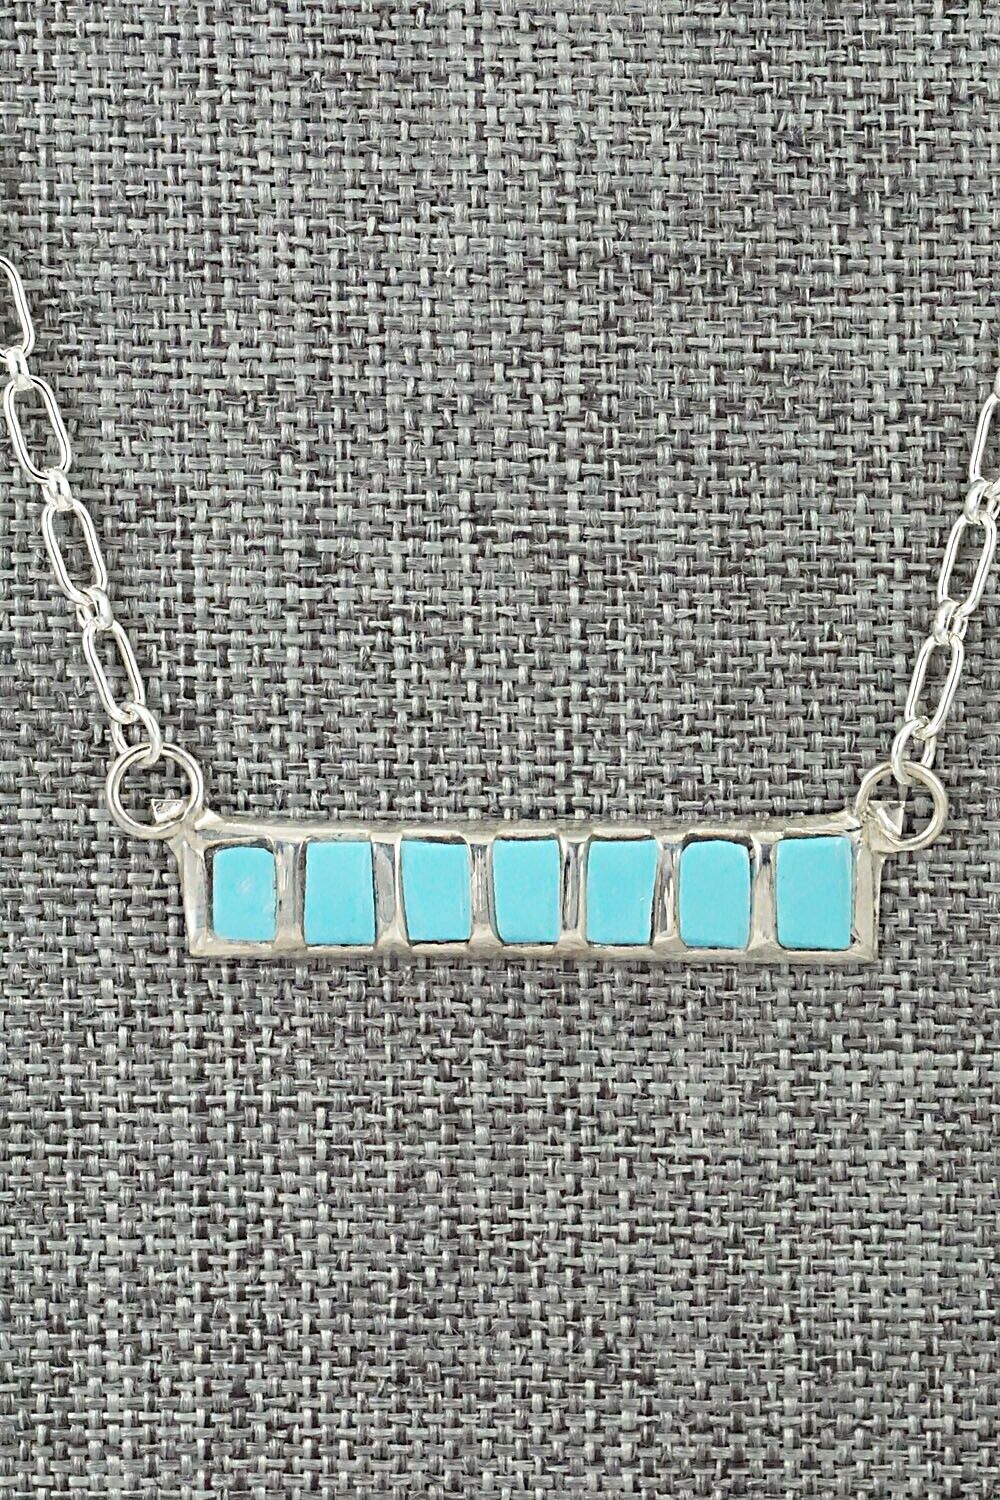 Turquoise & Sterling Silver Necklace - Glennetta Luna